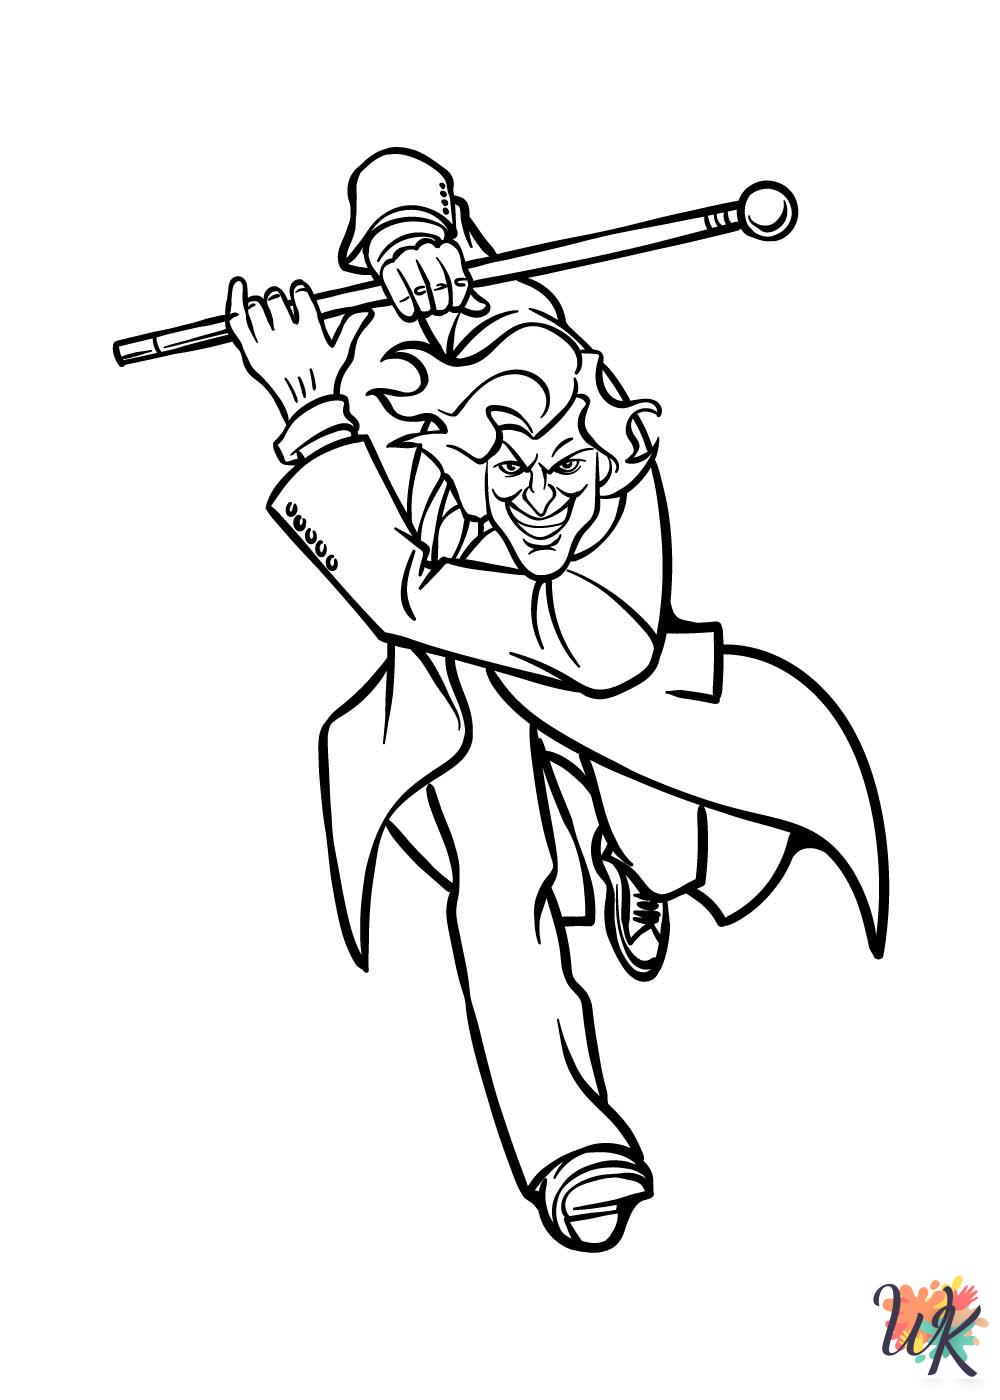 Joker coloring pages for adults